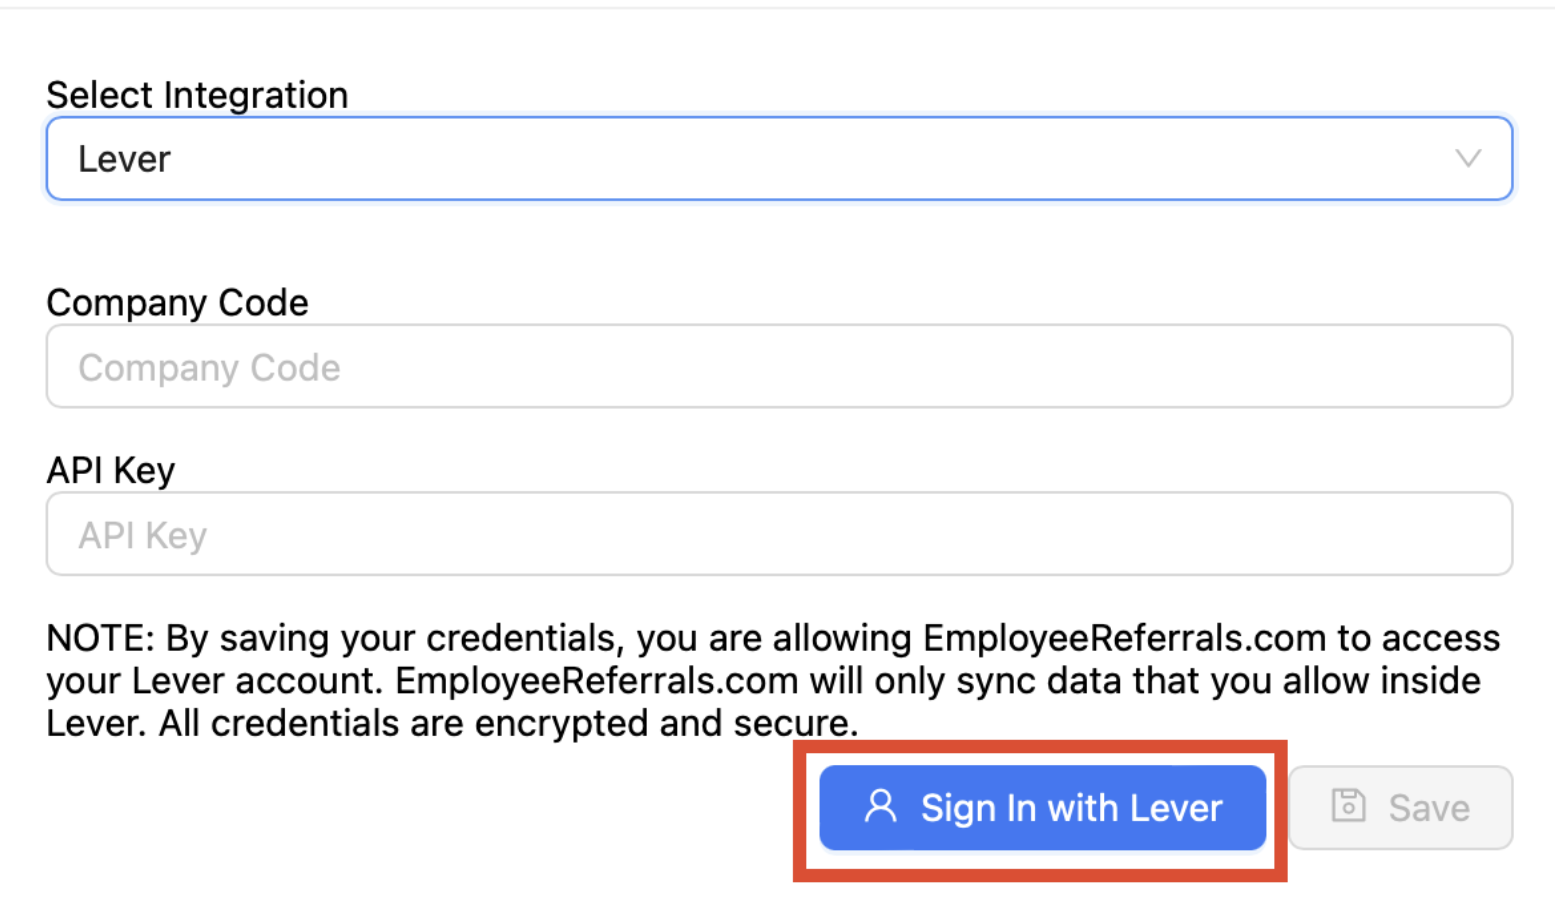 Integration selection form with Sign in with Lever button outlined